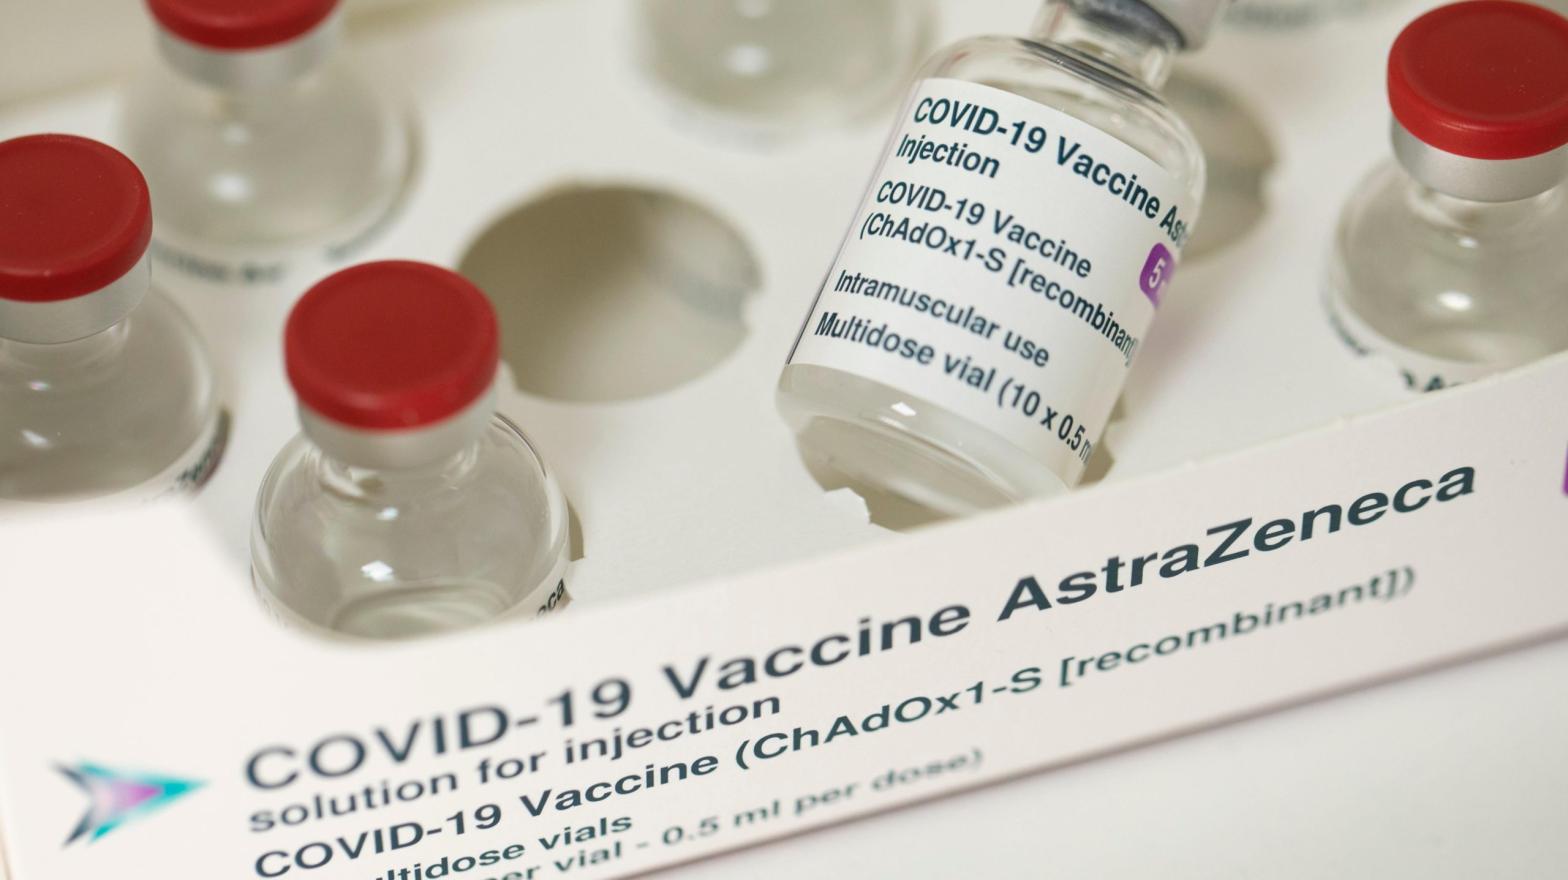 Vials of the covid-19 vaccine developed by Oxford University and AstraZeneca (Photo: Dan Kitwood, Getty Images)